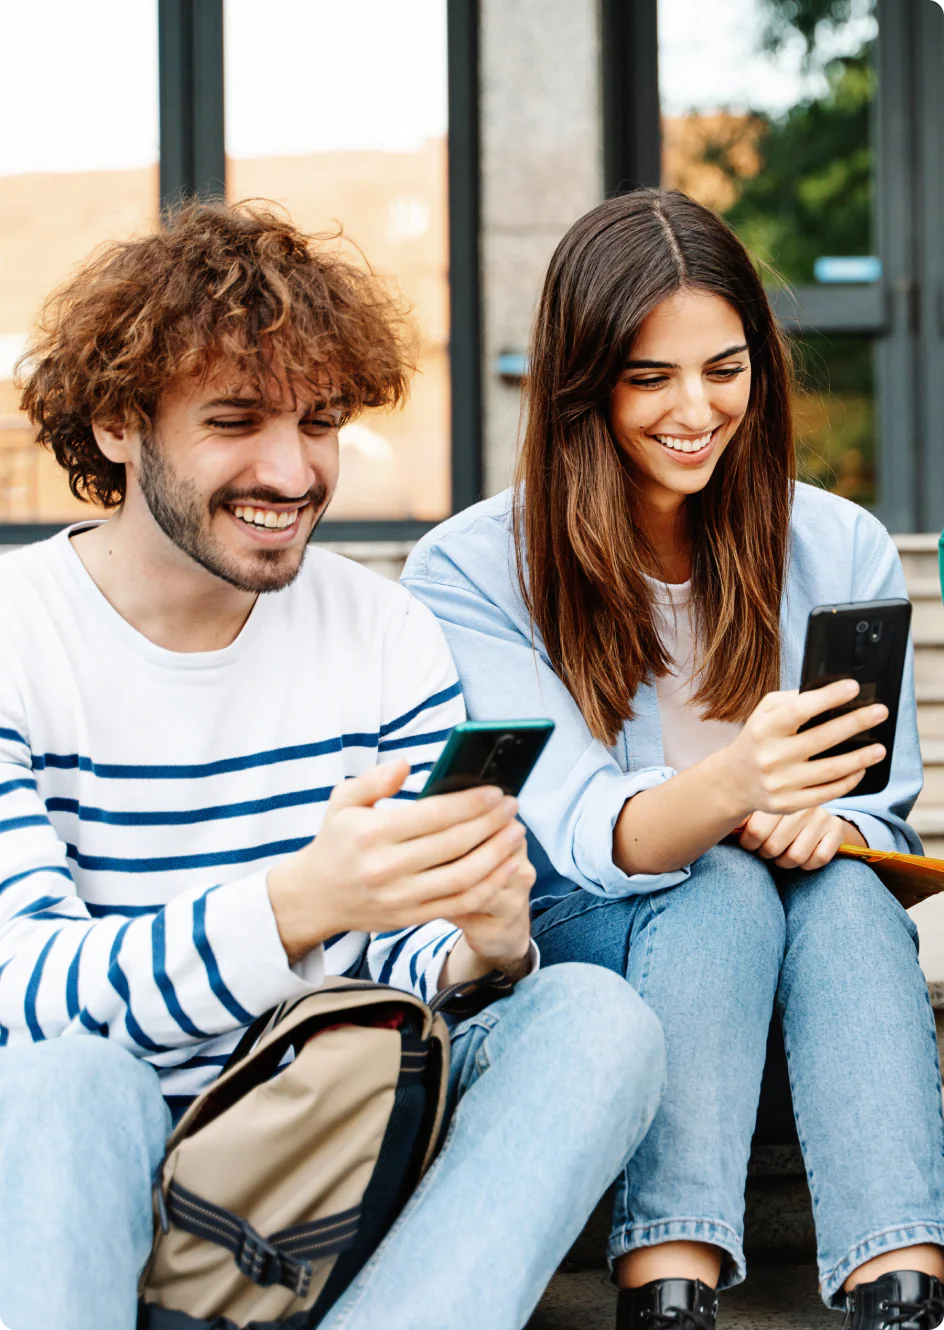 Gen Z customers purchasing products through messaging channels.